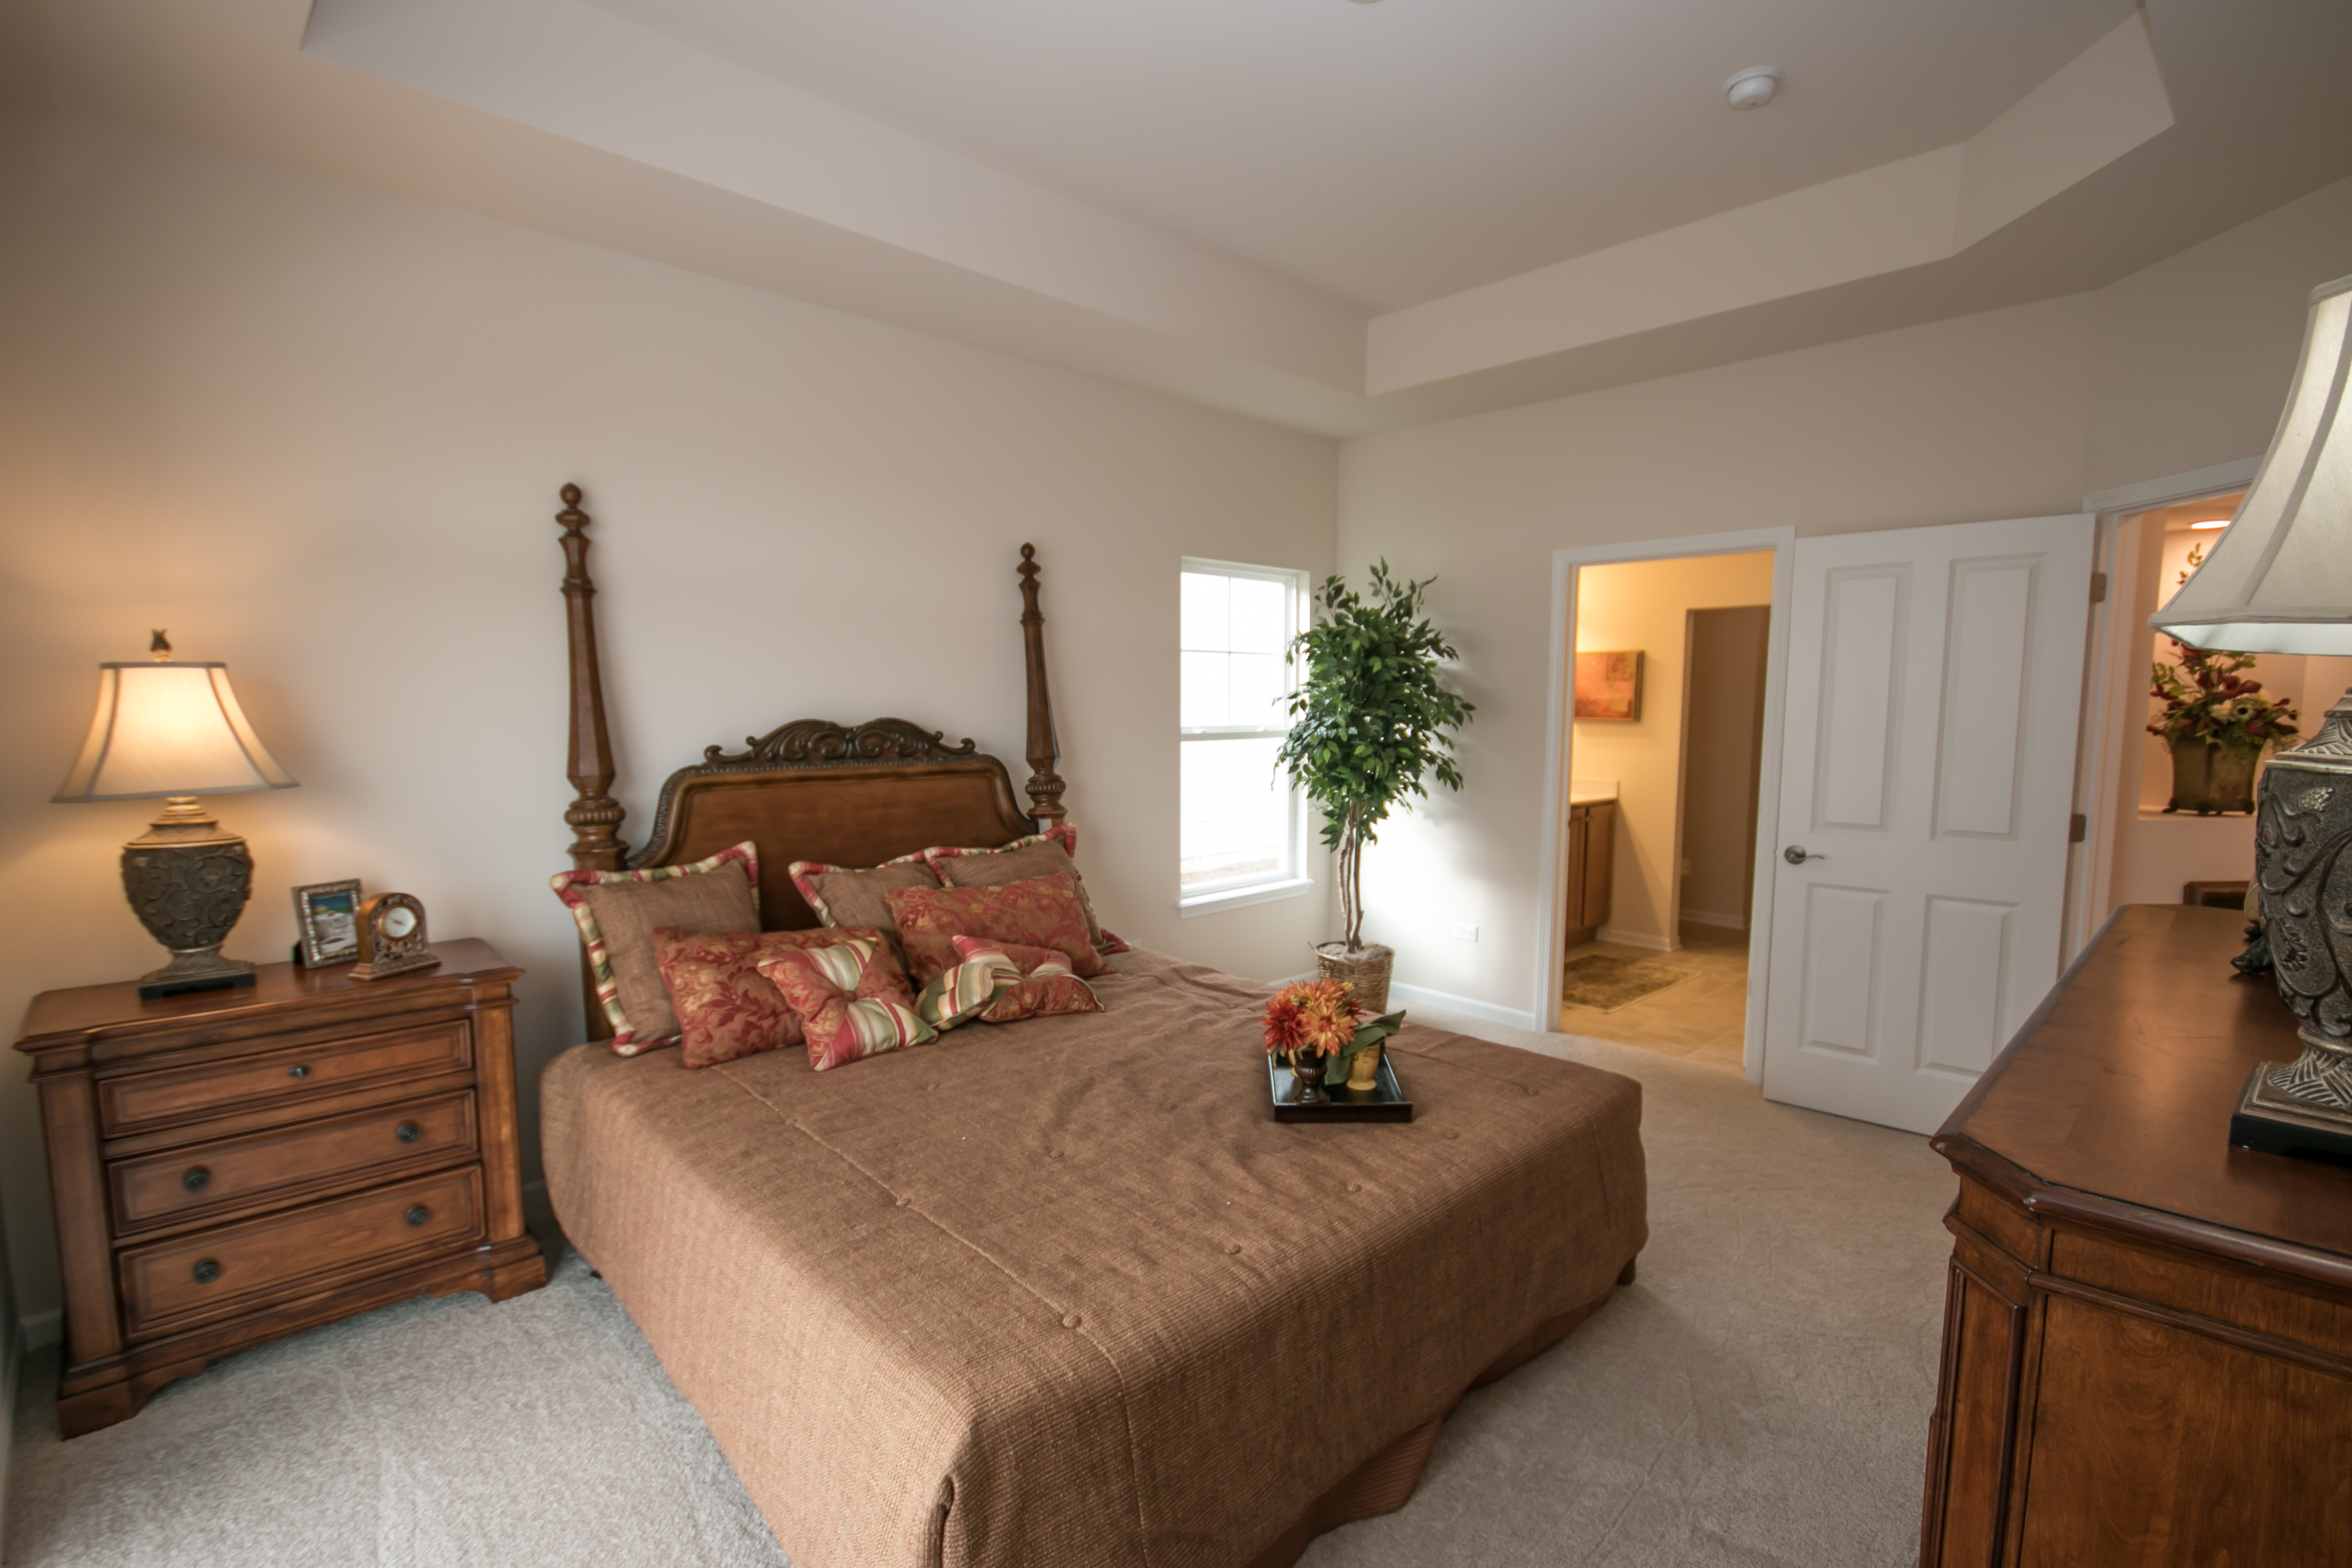 Volume ceilings, walk-in closets and large master baths complete the master suite.